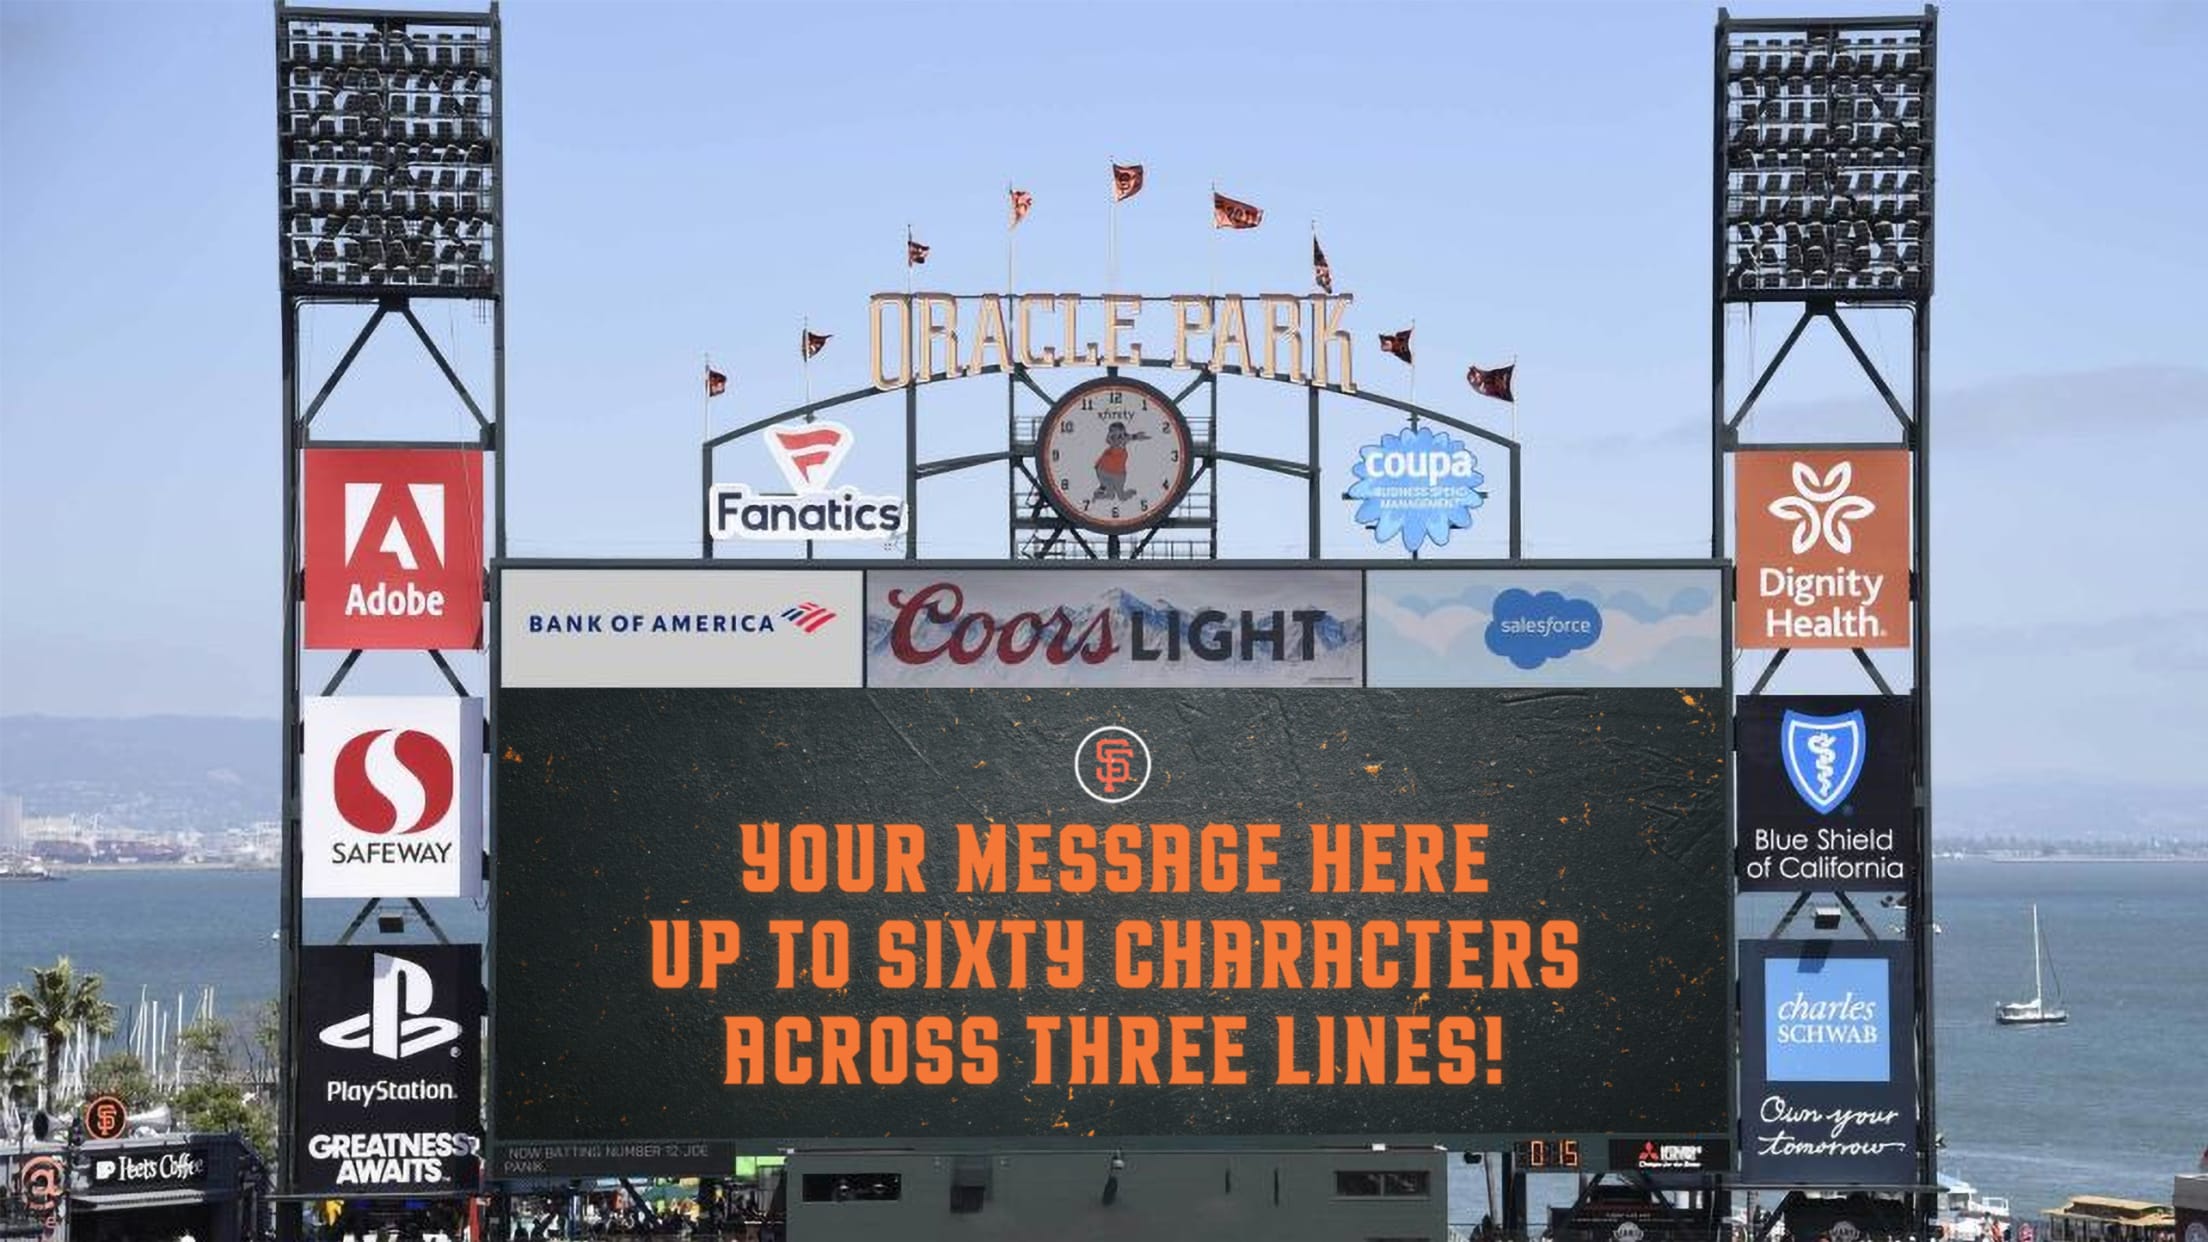 Linceblog: Another Asian-themed night at AT&T Park, but only the